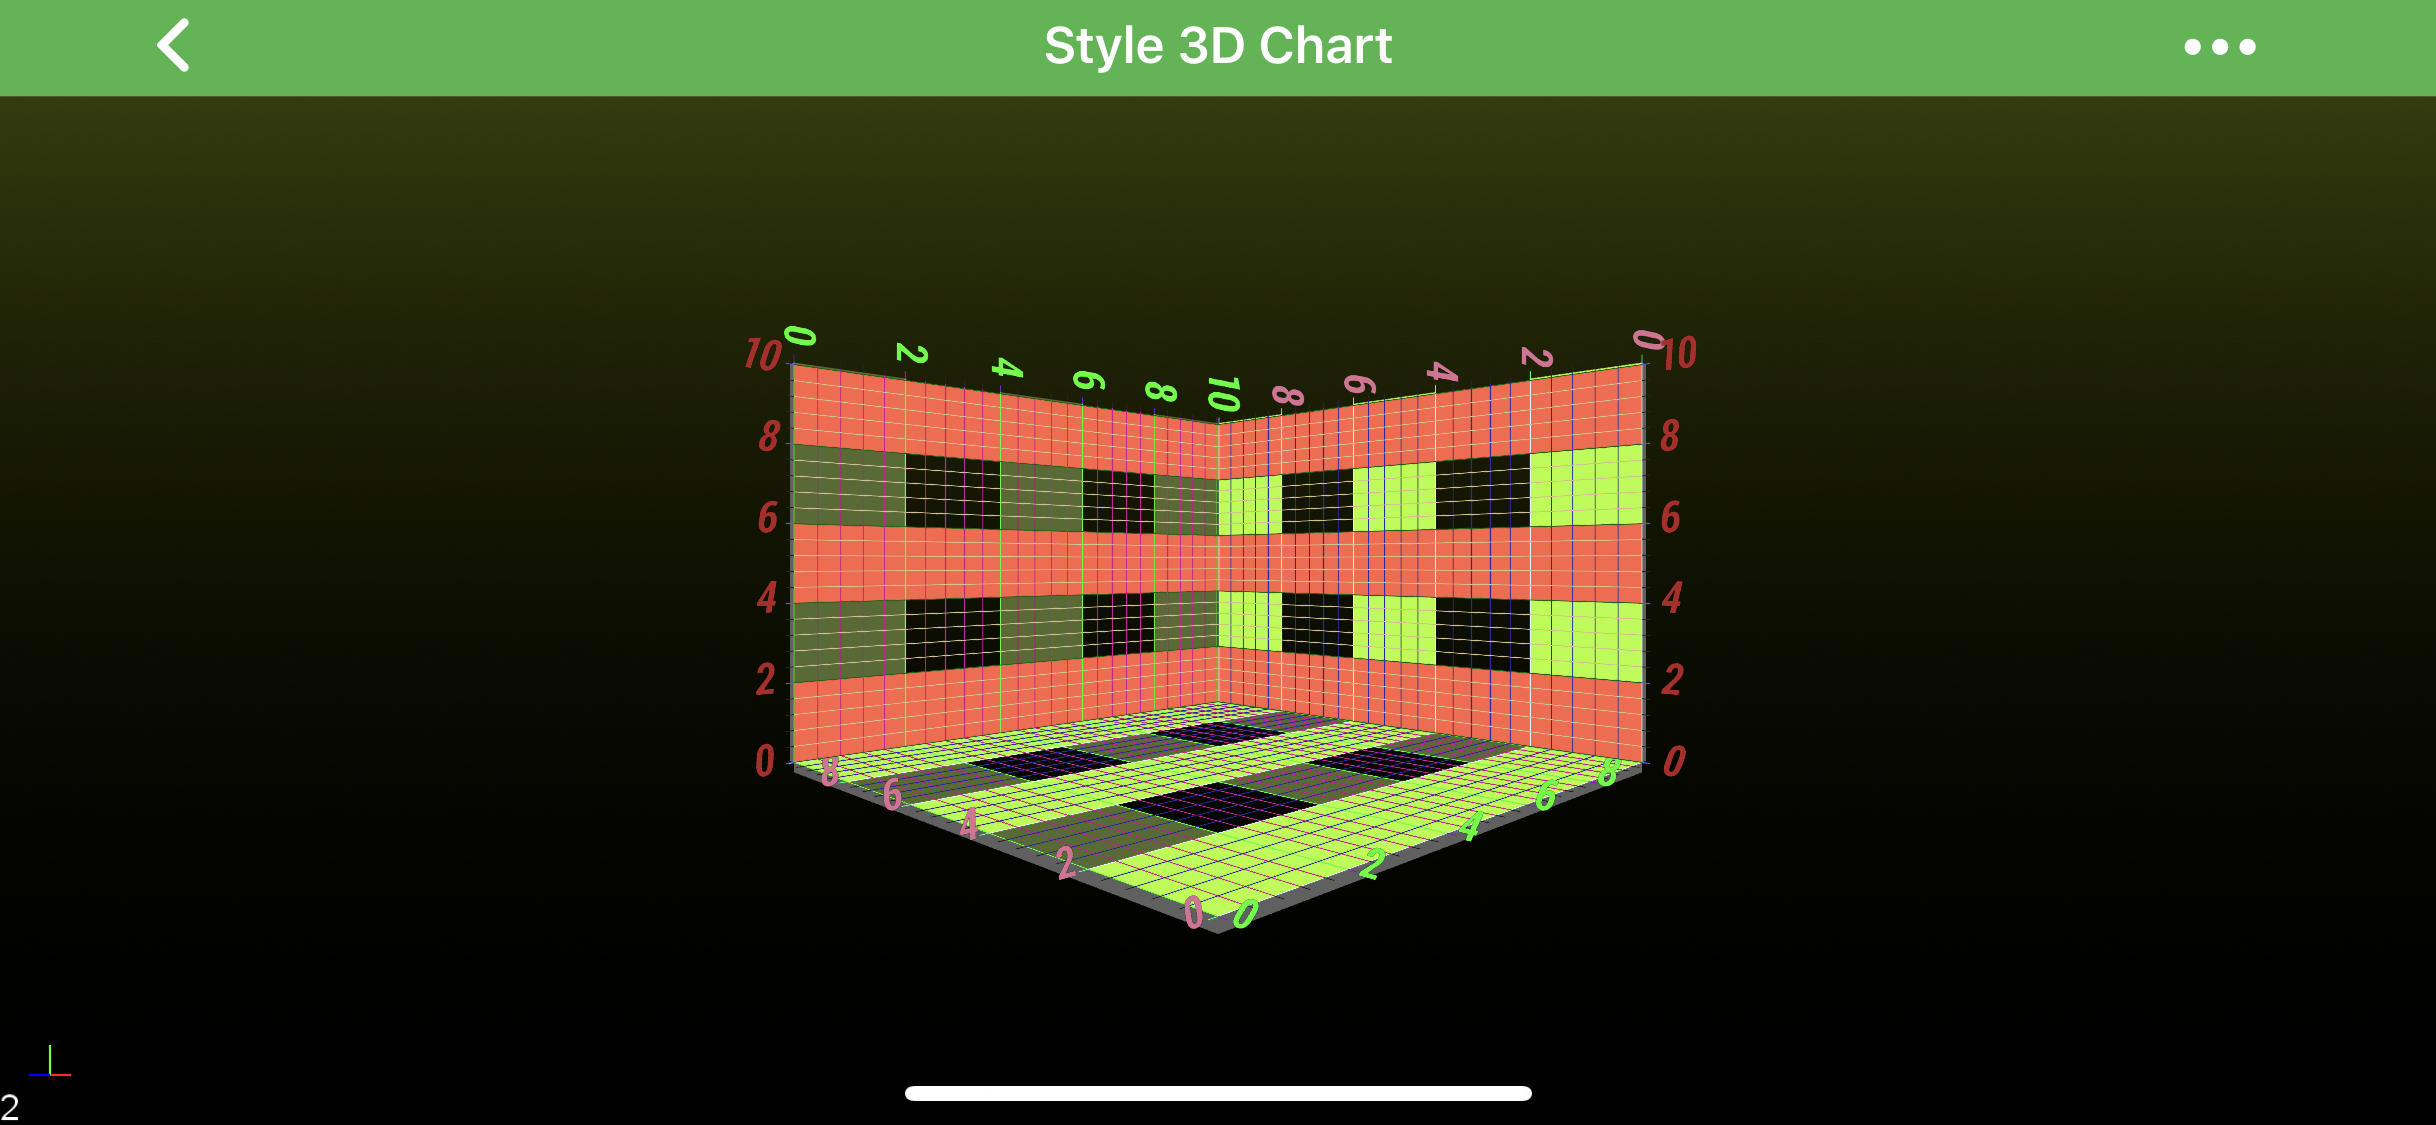 Style 3D Chart